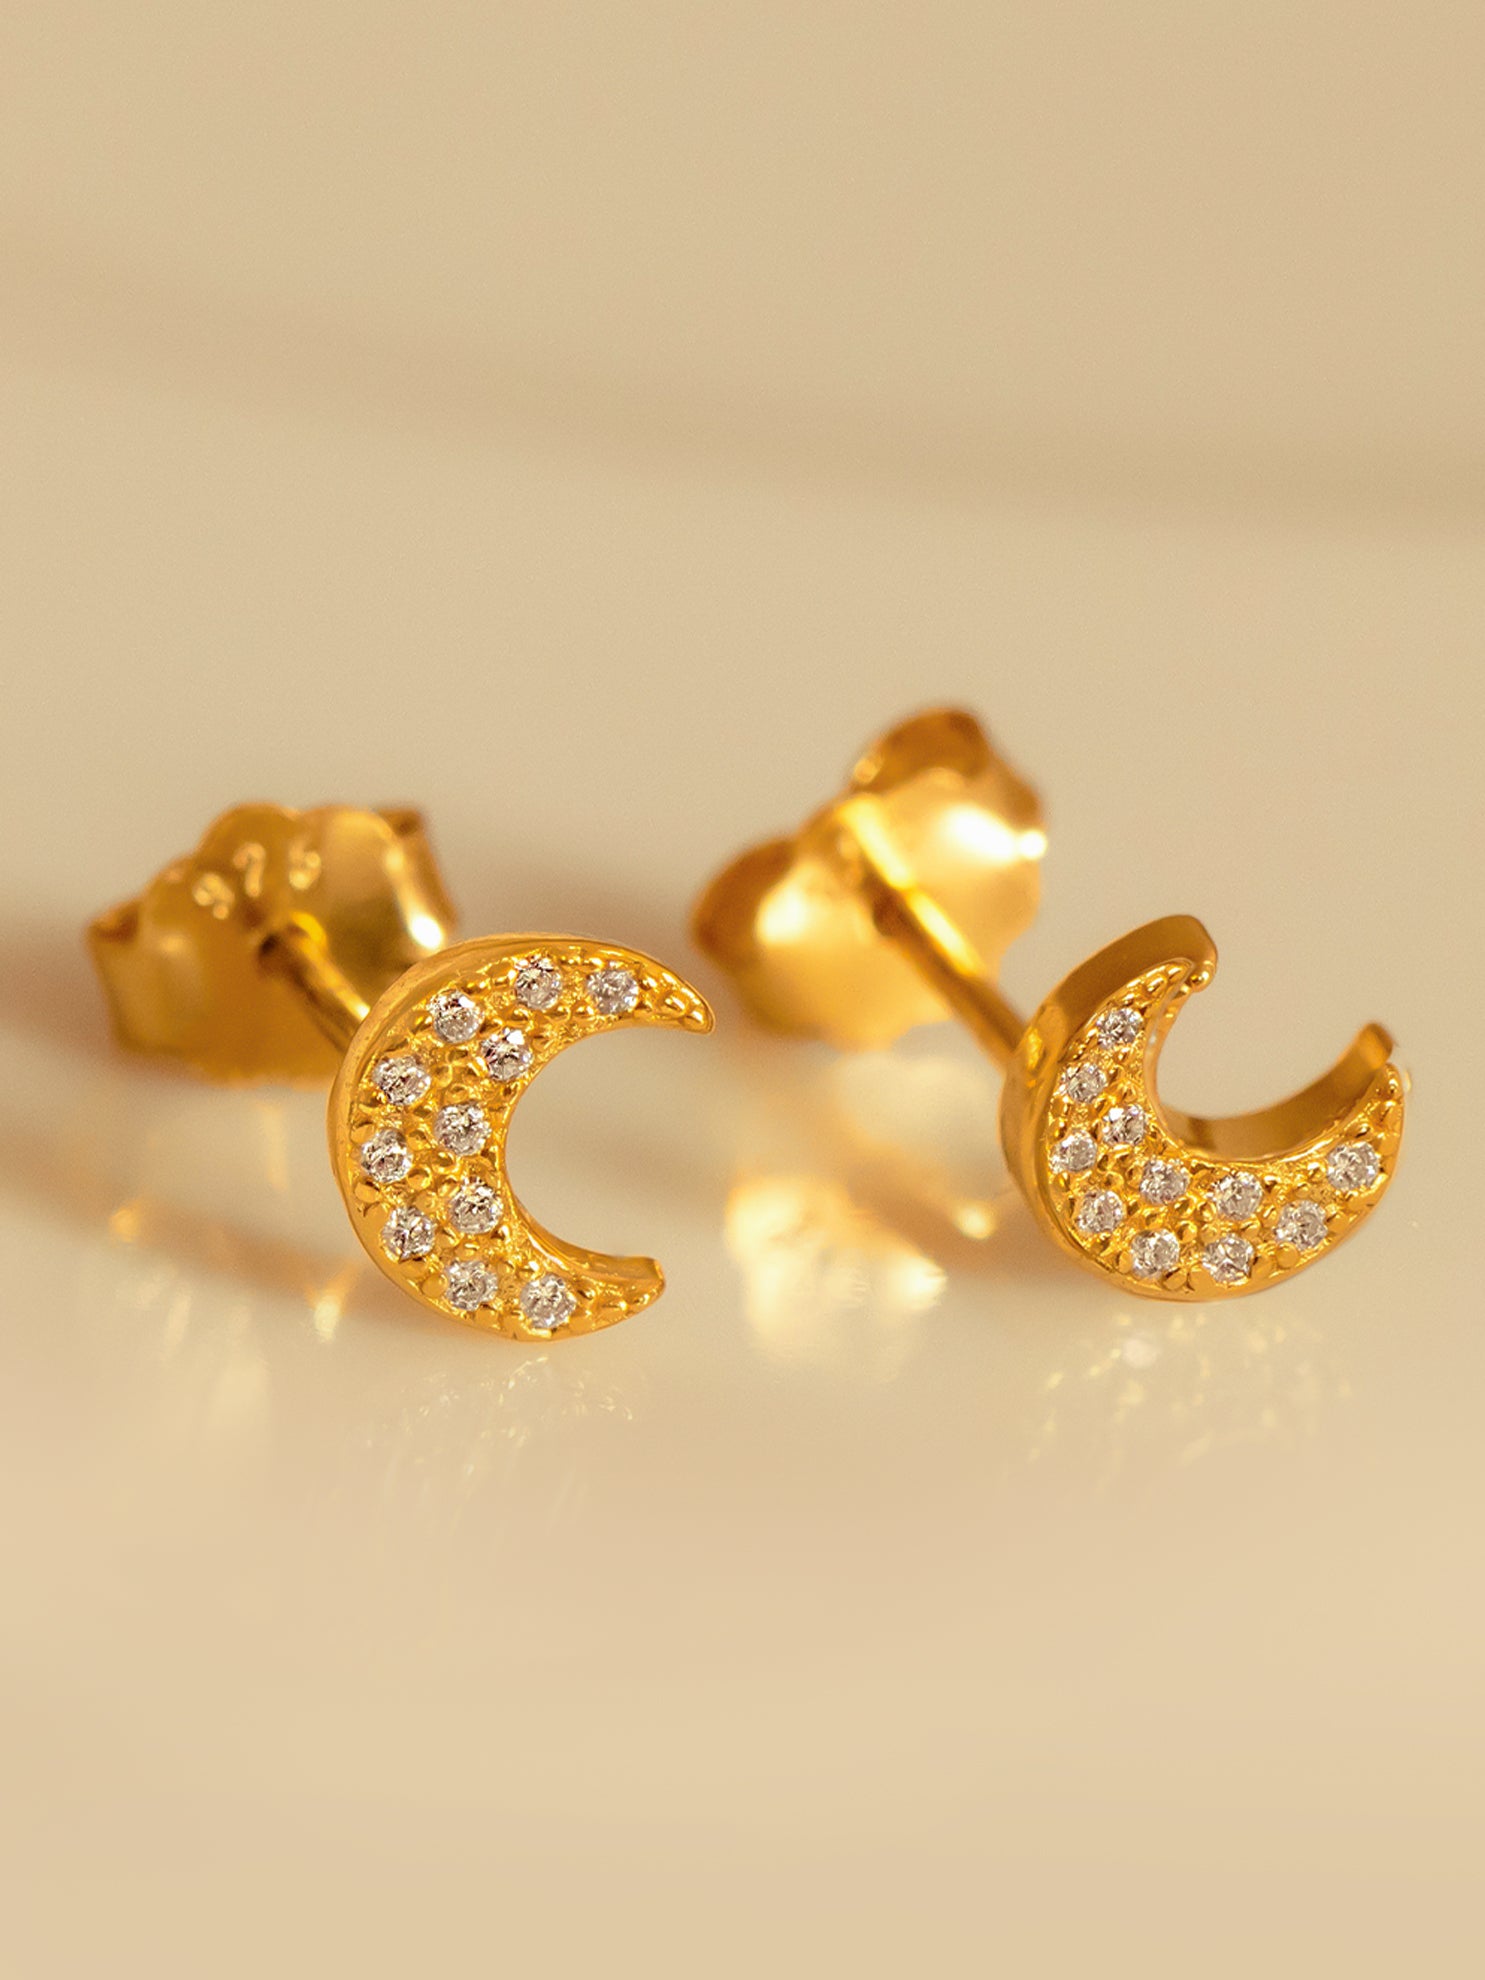 Gold Tiny Moon Stud Earrings With Stones